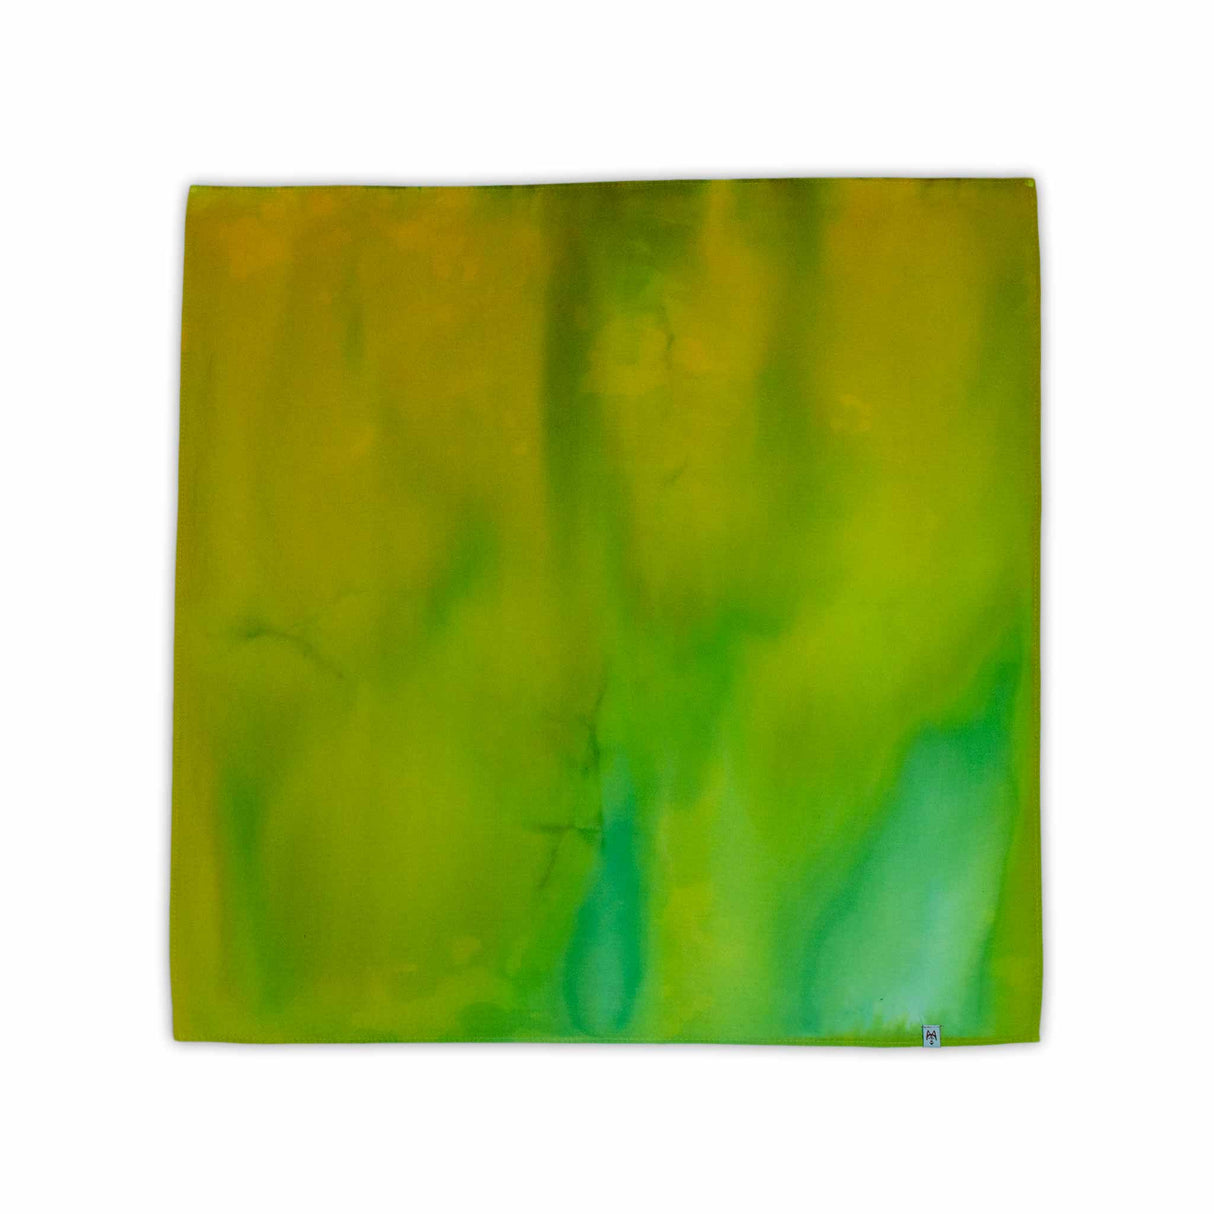 A square bandana with a lush ice dye pattern, featuring varying shades of lime and emerald green that blend into each other like watercolors.